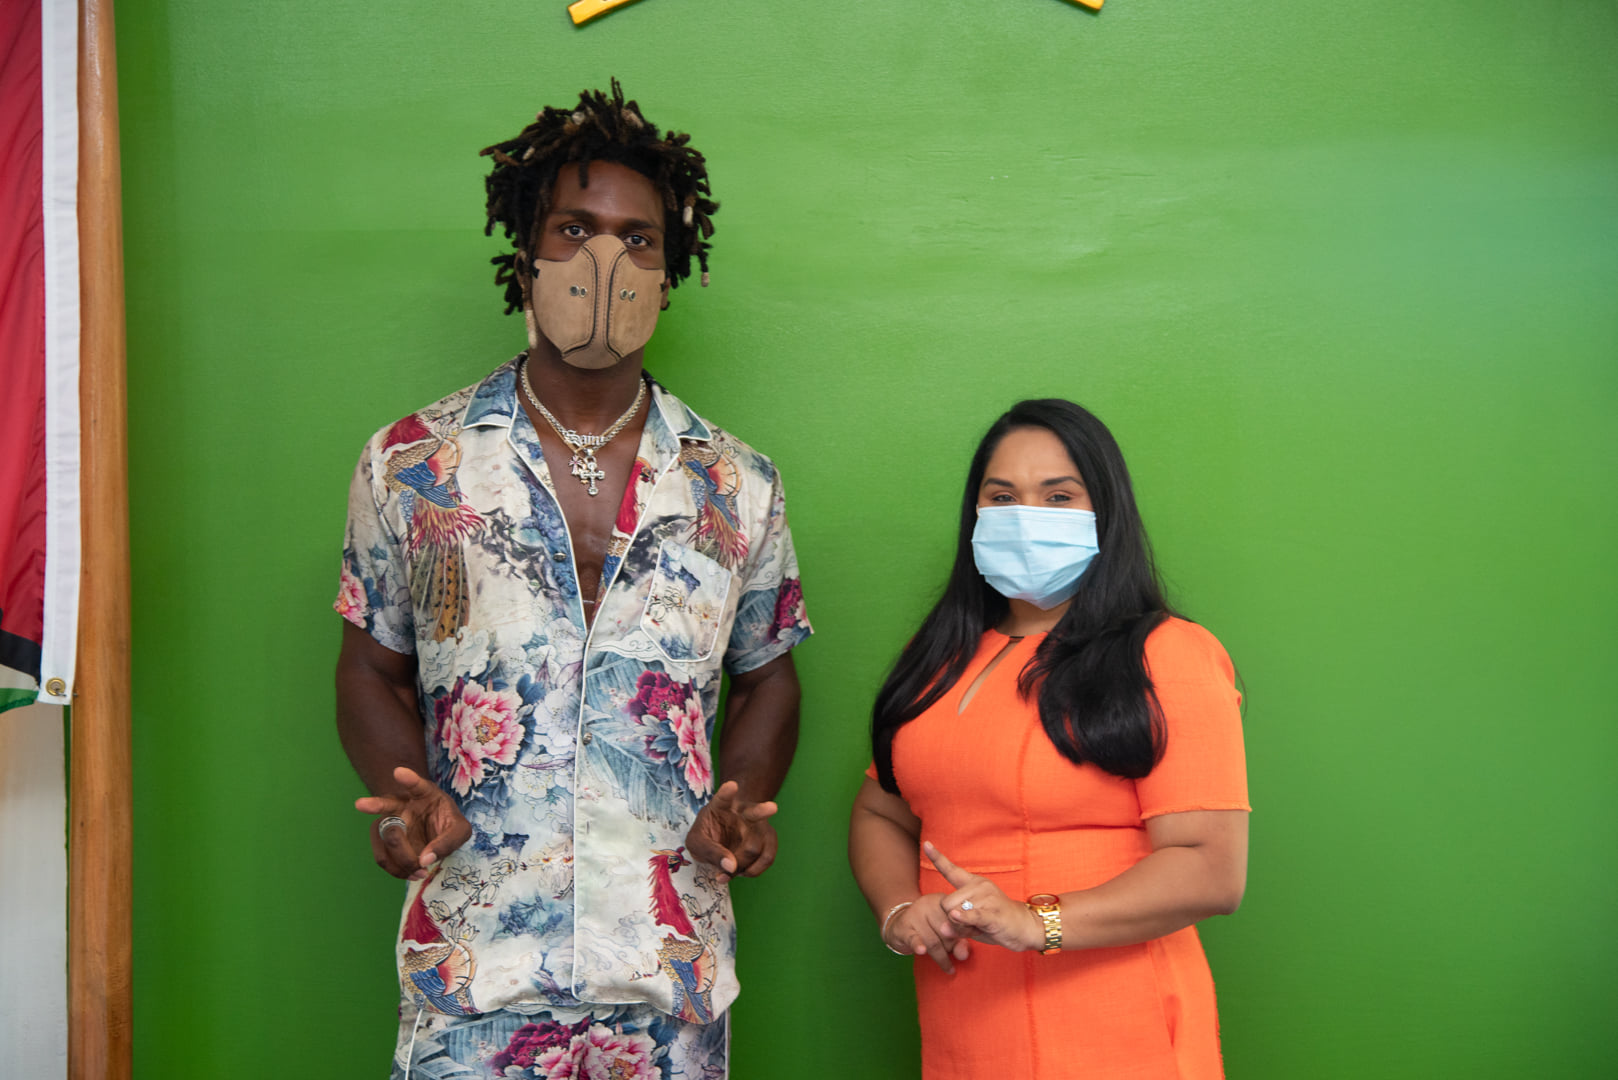 First Lady, Mrs. Arya Ali and the iconic rapper, SAINt JHN